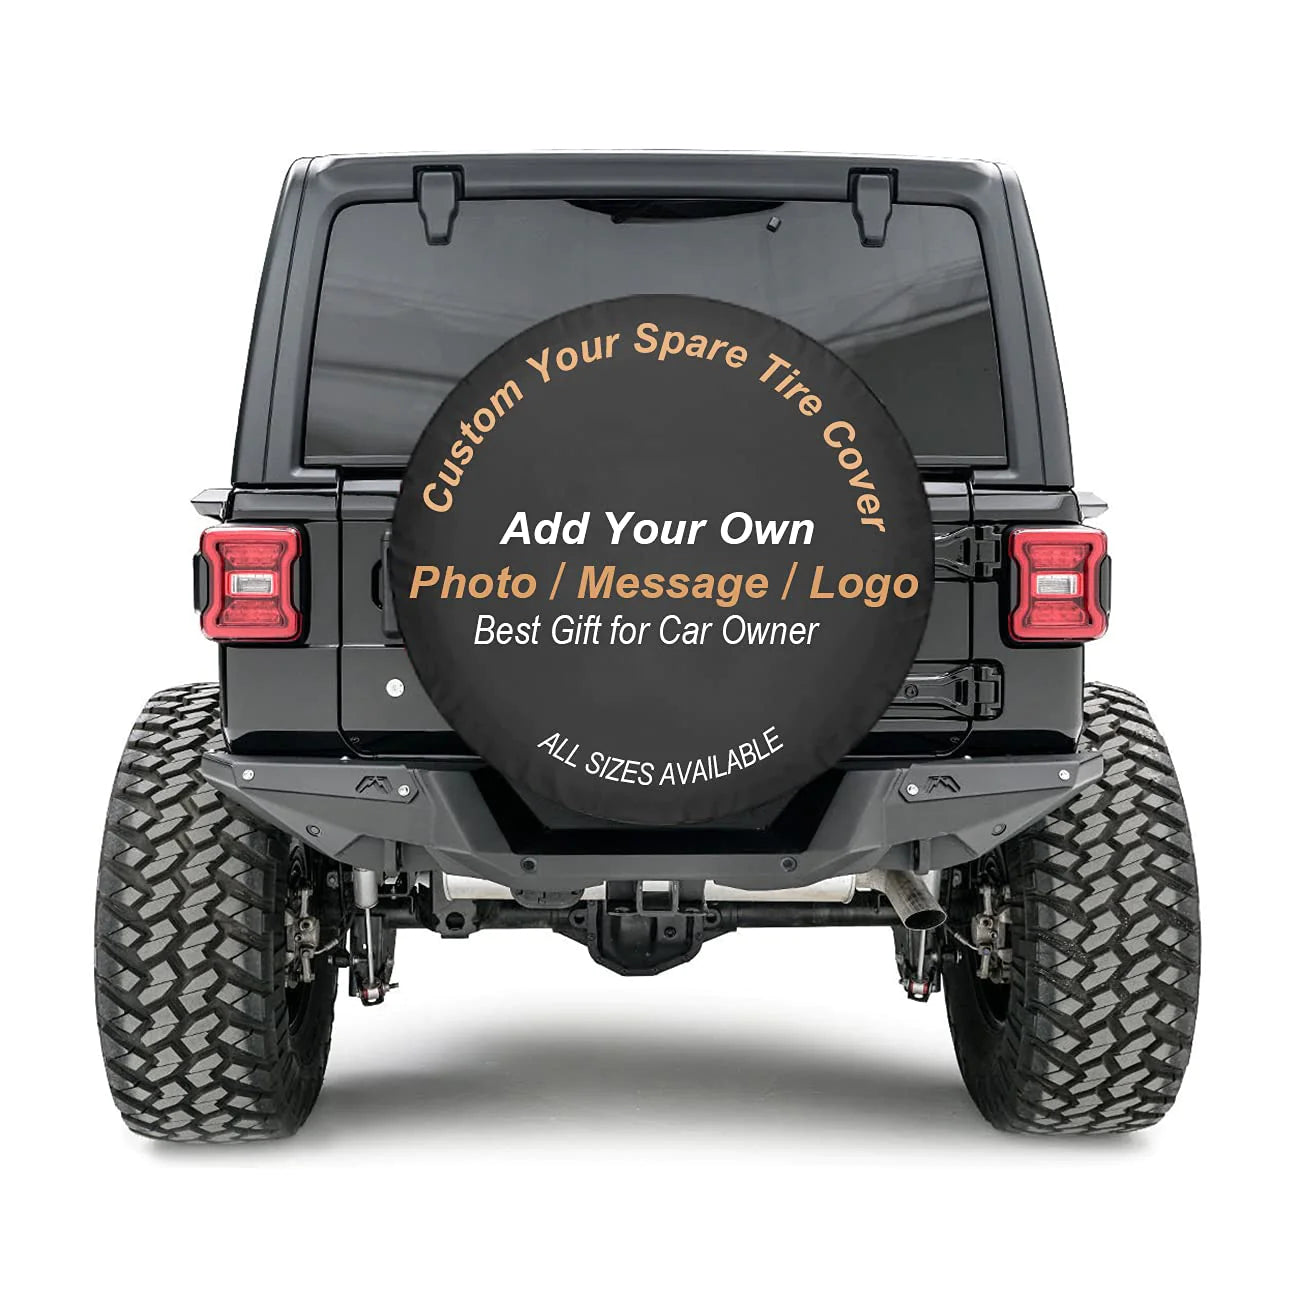 A tire cover is a mod that can add some flair and personality to your Jeep.